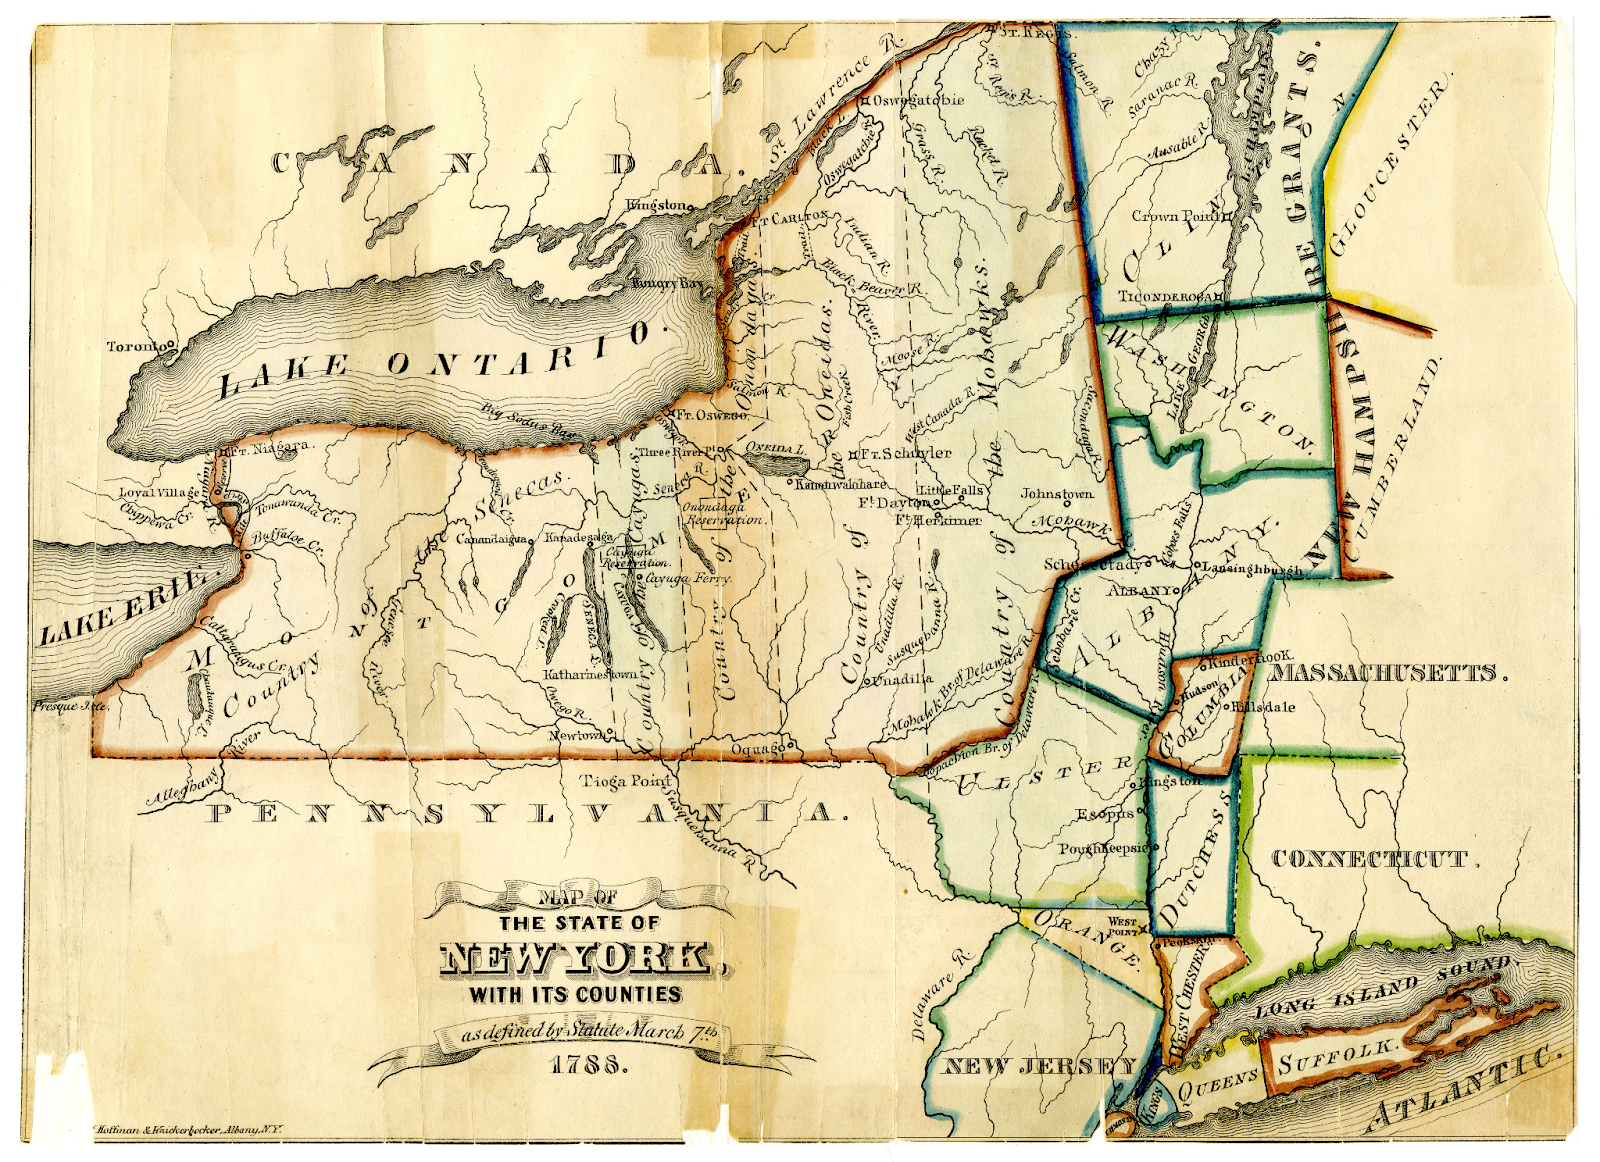 A map from the New York State Archives dated to 1788. The map shows counties of New York traced in different colors, and places mentioned by Jemison, such as Genesee, are visible on the map.